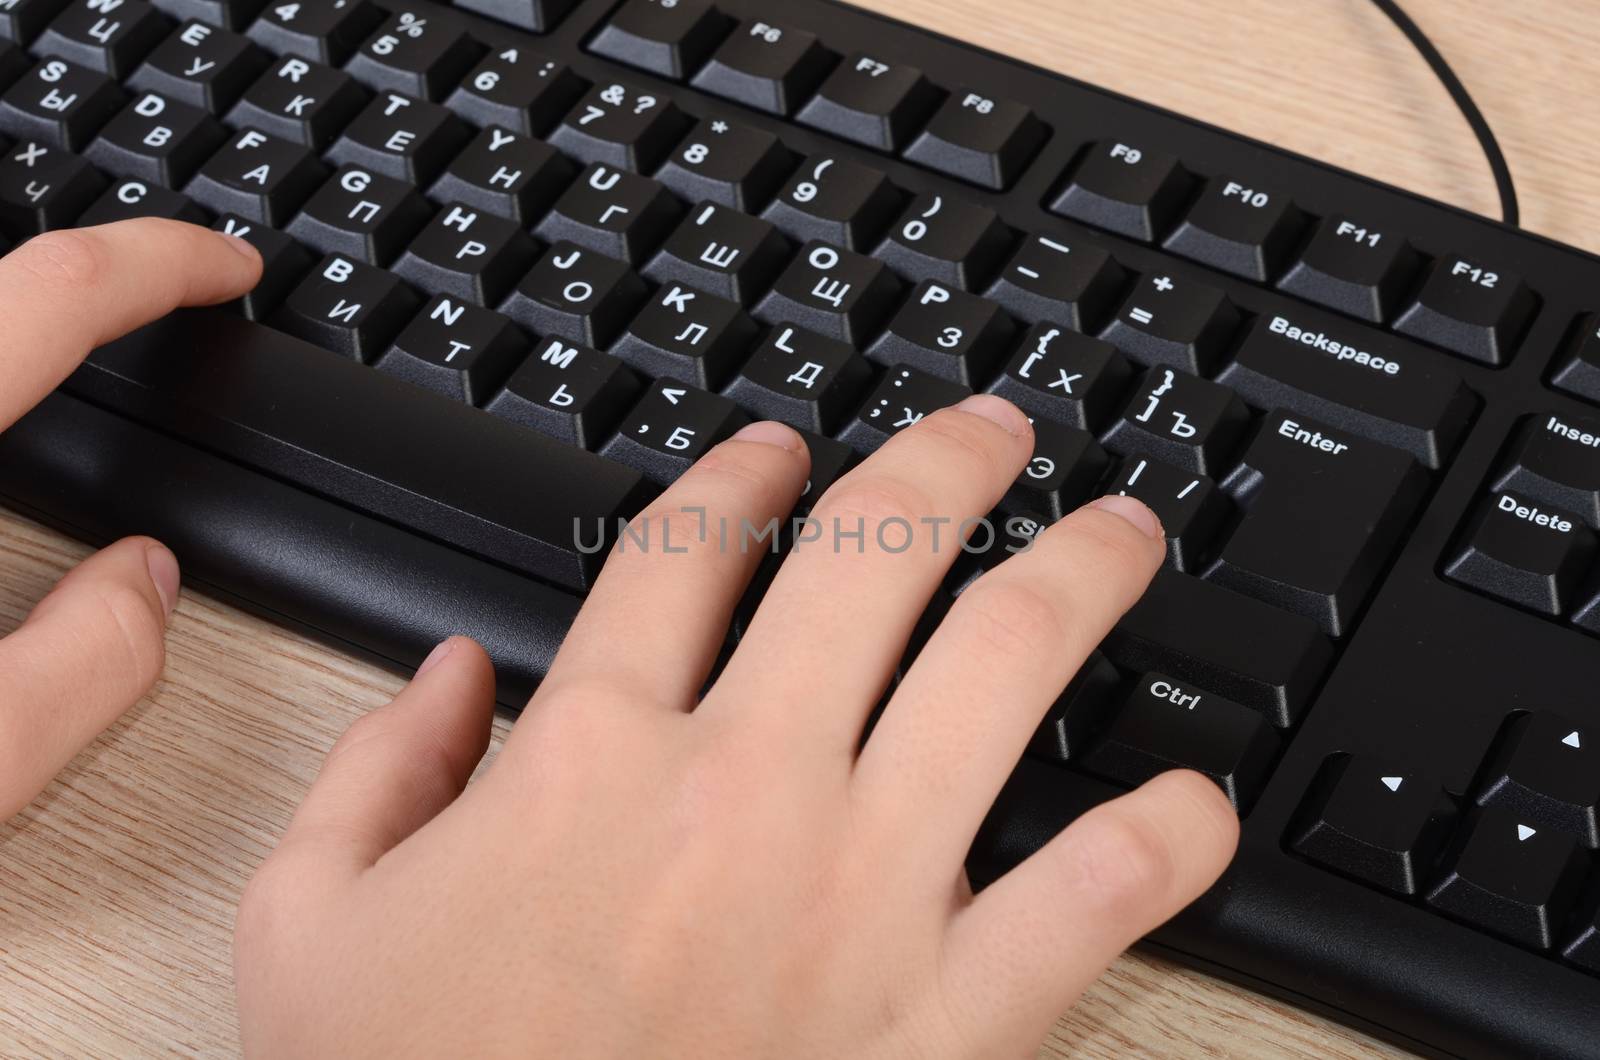 The women's hands typing on the keyboard